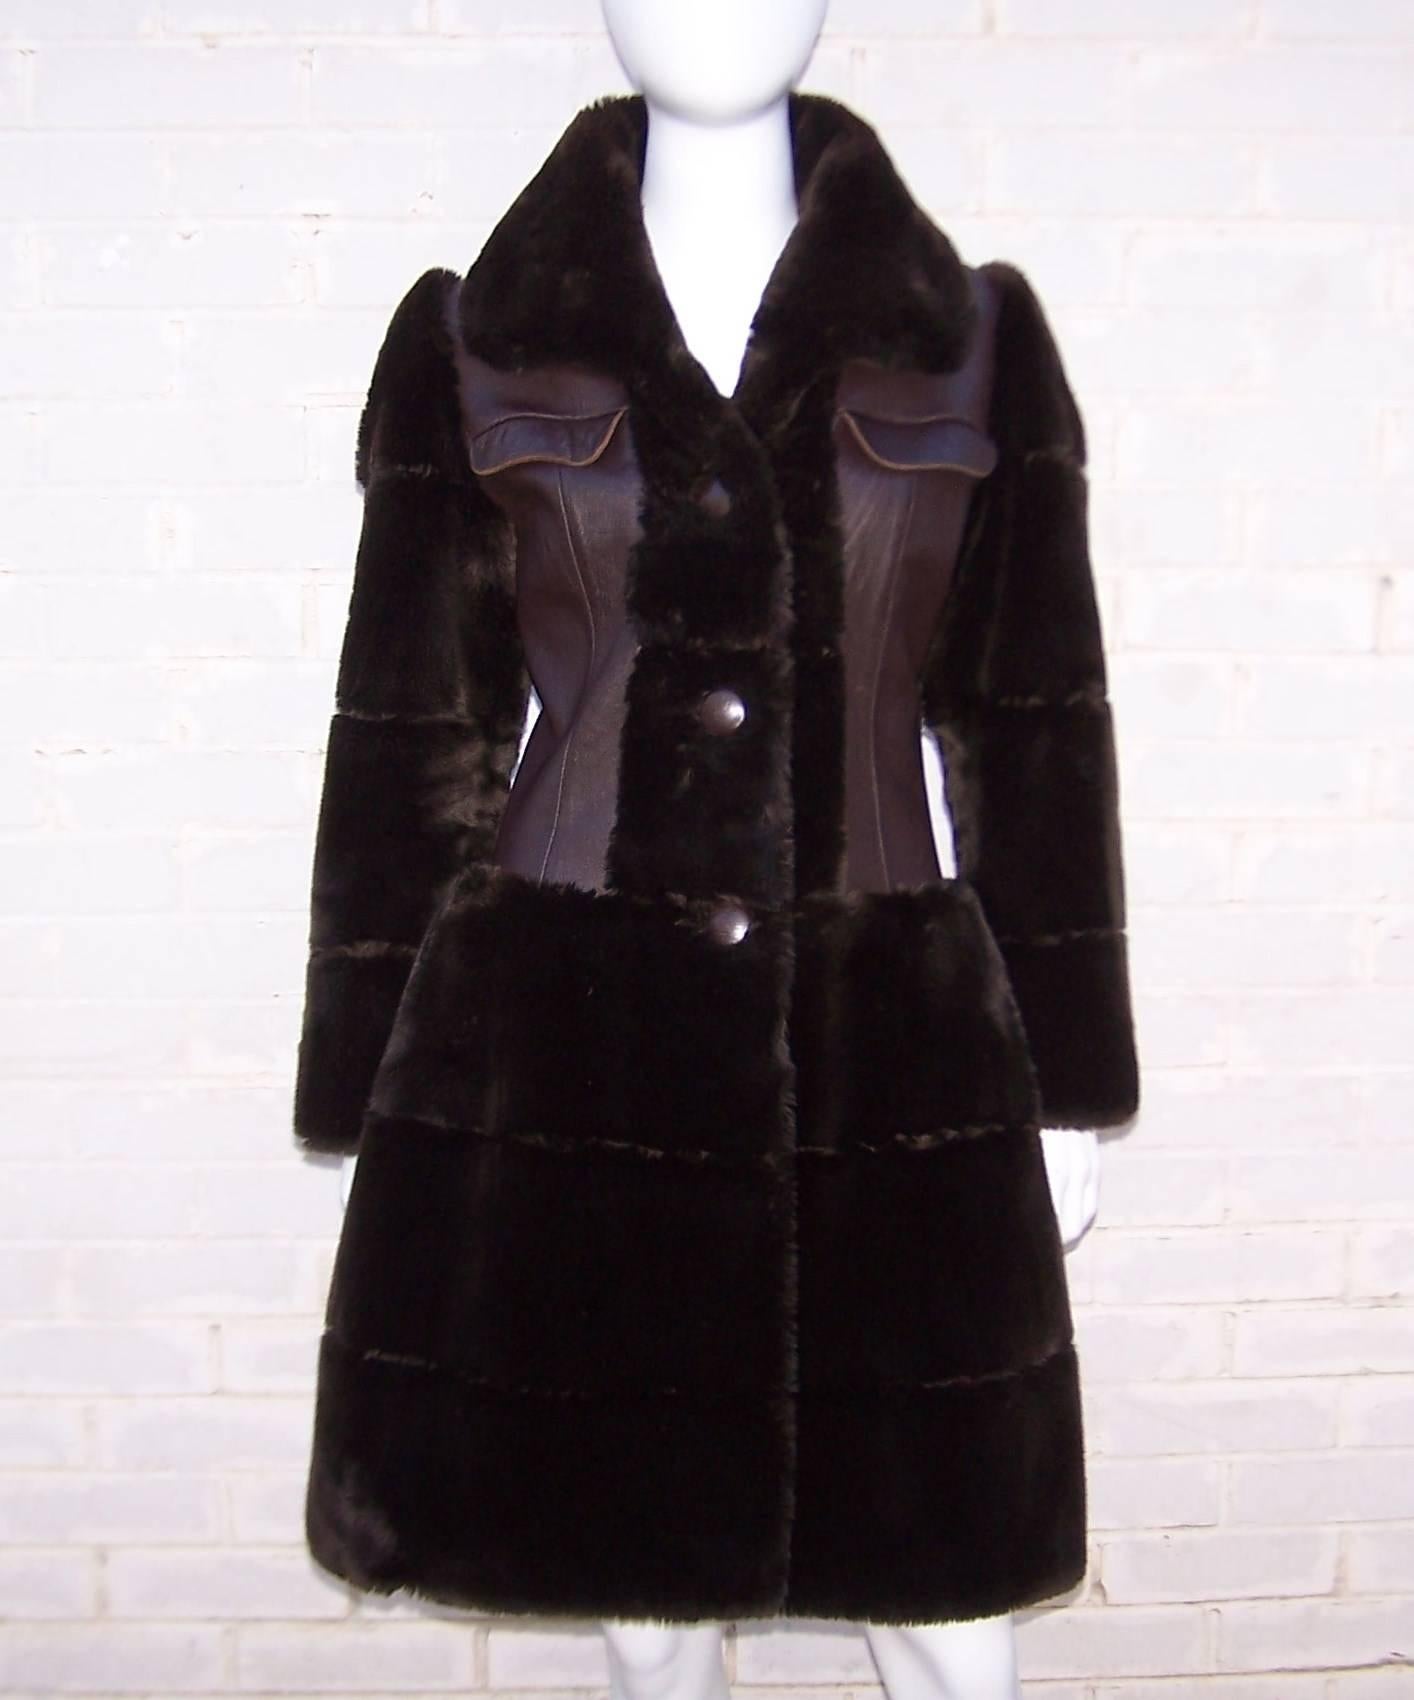 This stylish 1960's French design by J. P. Weinberger is reminiscent of an 1930's flight jacket a la Amelia Earhart.  A little bit of steampunk and a whole lotta mod!  The high quality dark brown faux fur body is accented with a coordinating leather